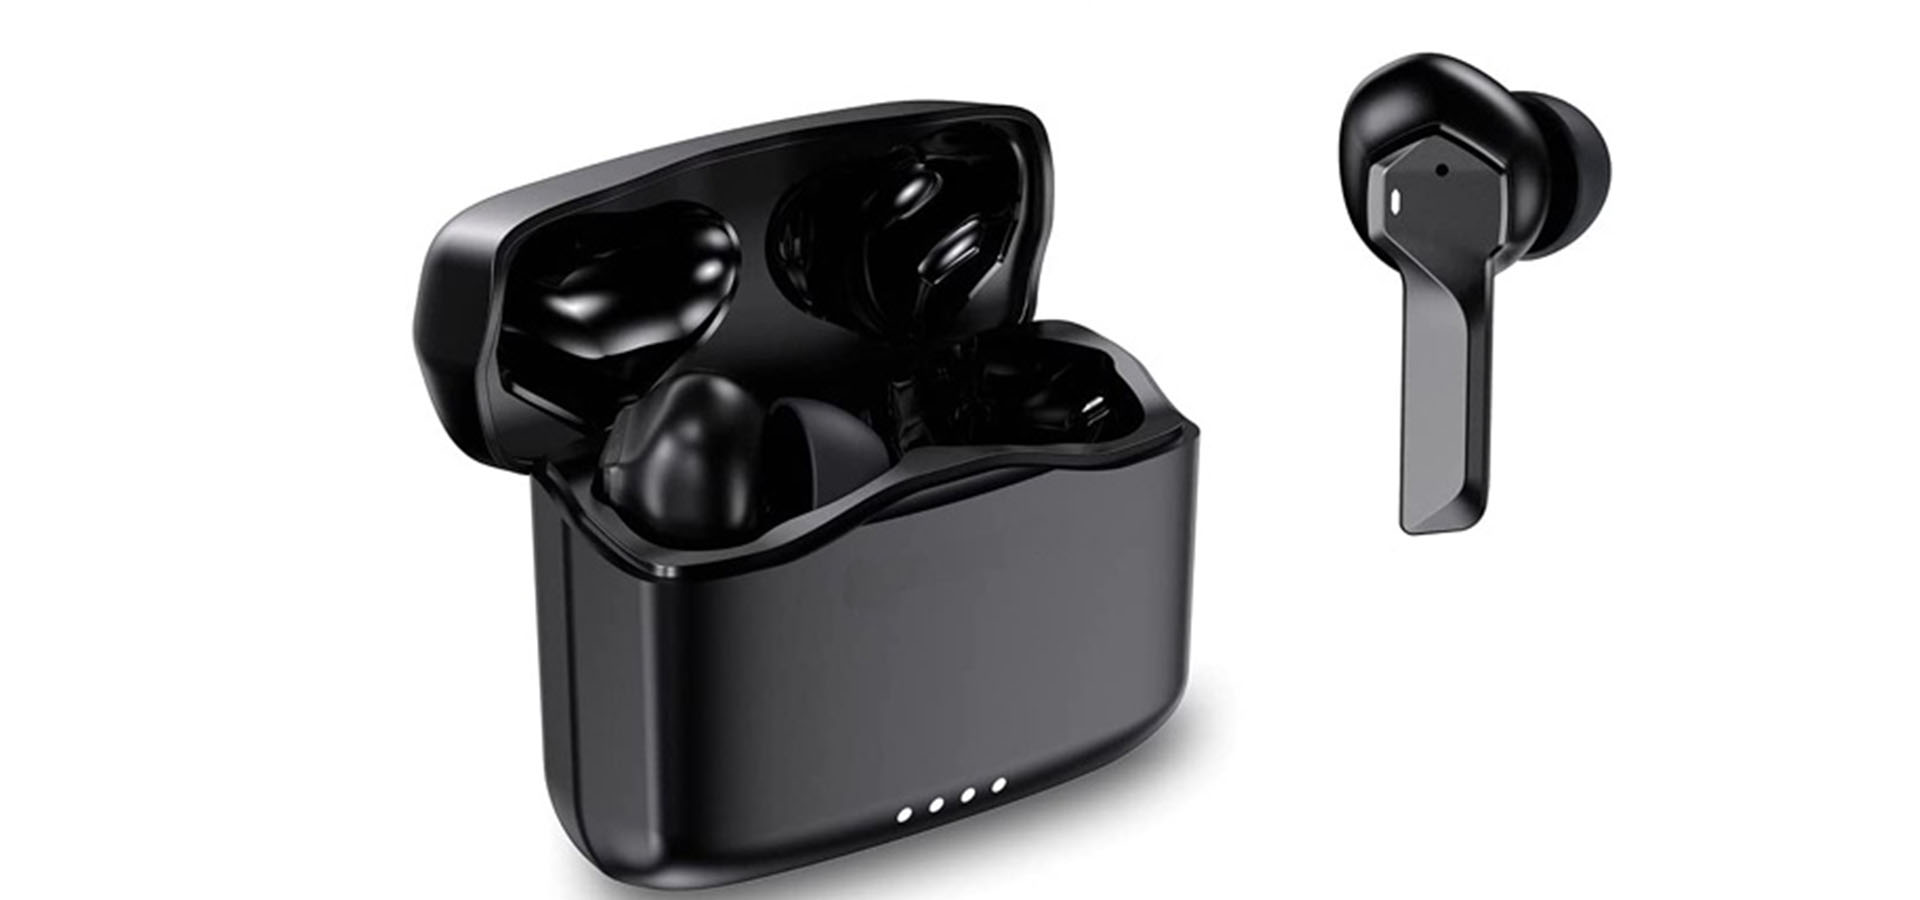 4 microphones provide 3 times clarity calling than wireless earbuds